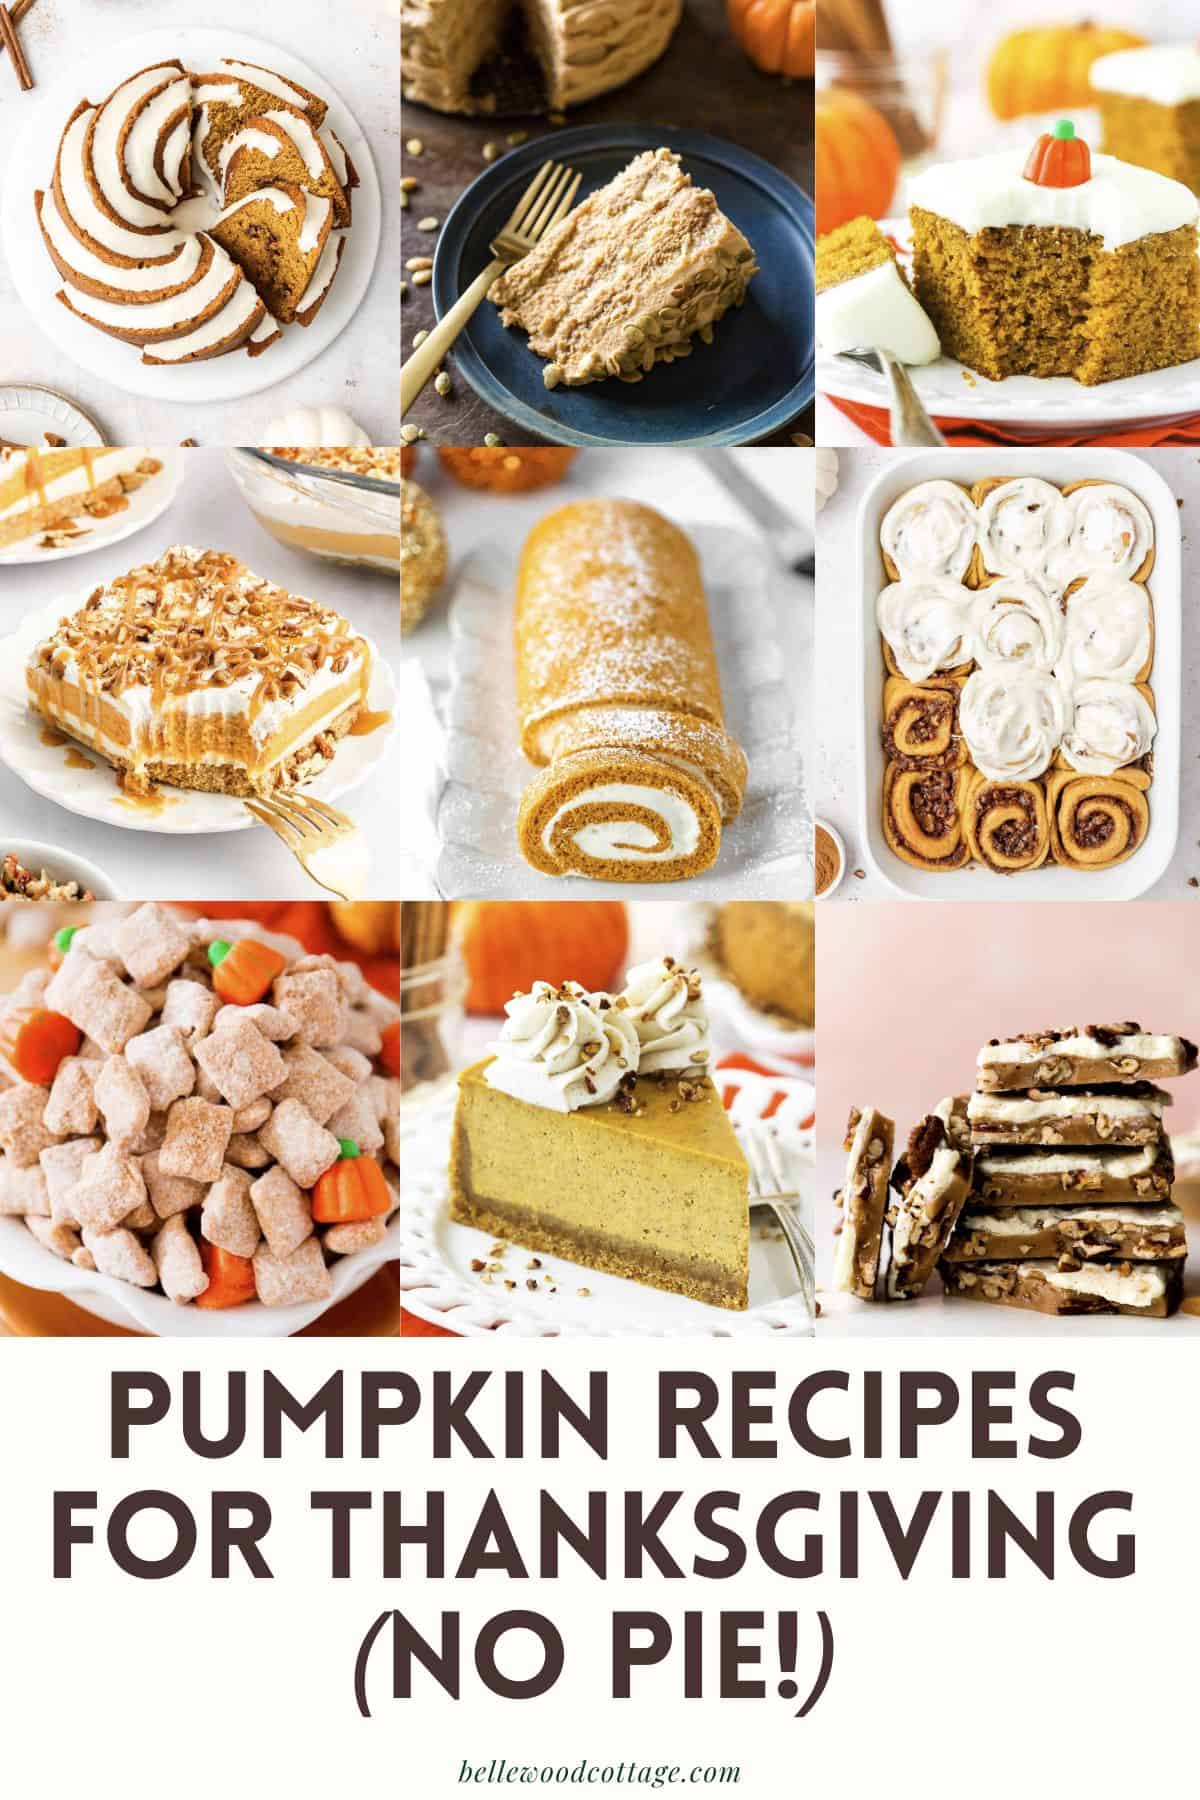 A collage of pumpkin desserts with the words, "Pumpkin Recipes for Thanksgiving (No Pie!)".